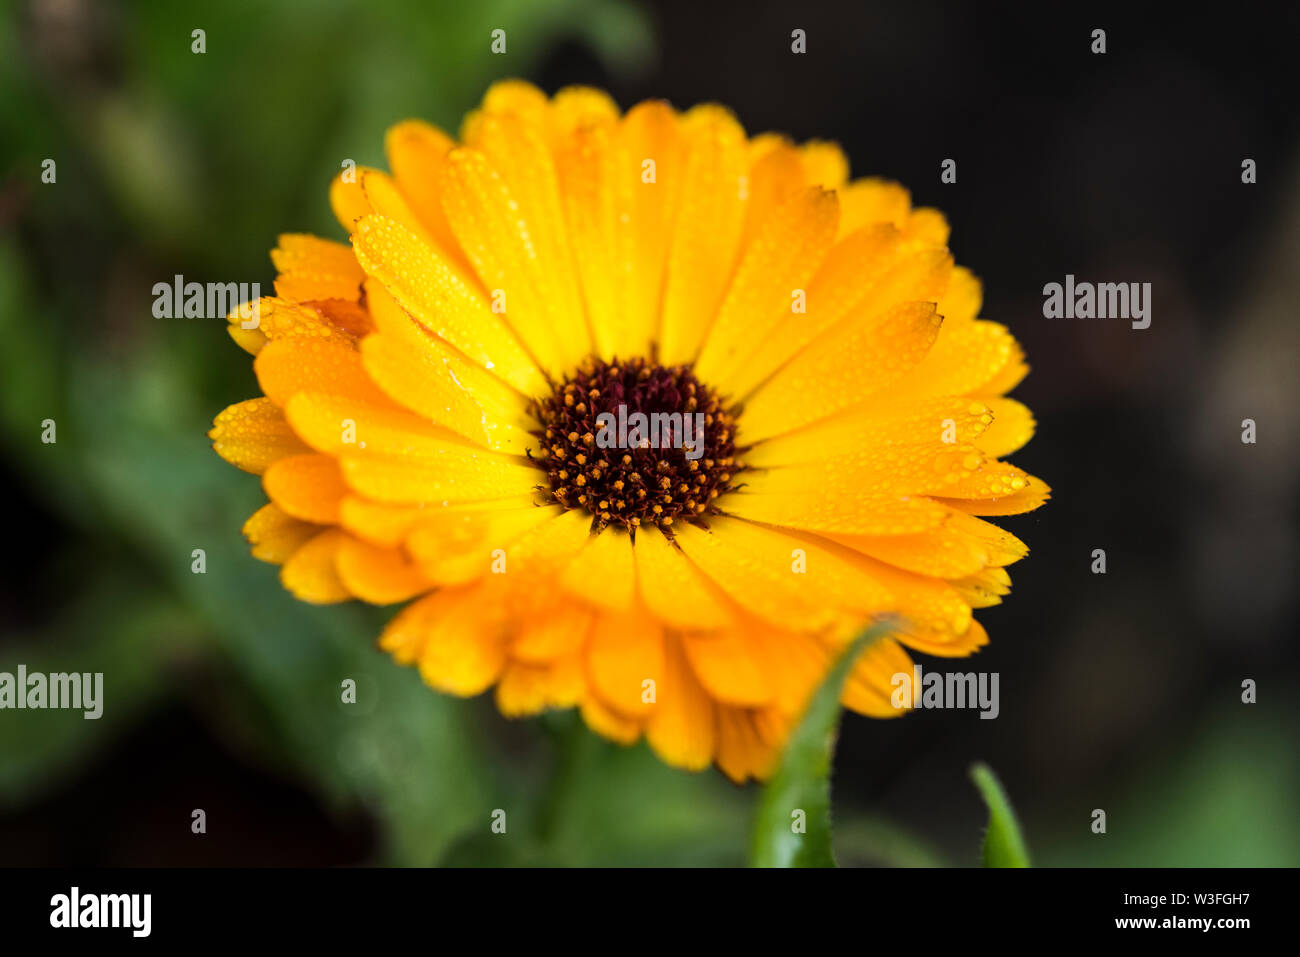 Close up of edible orange marigold flower with dew on the petals Stock Photo